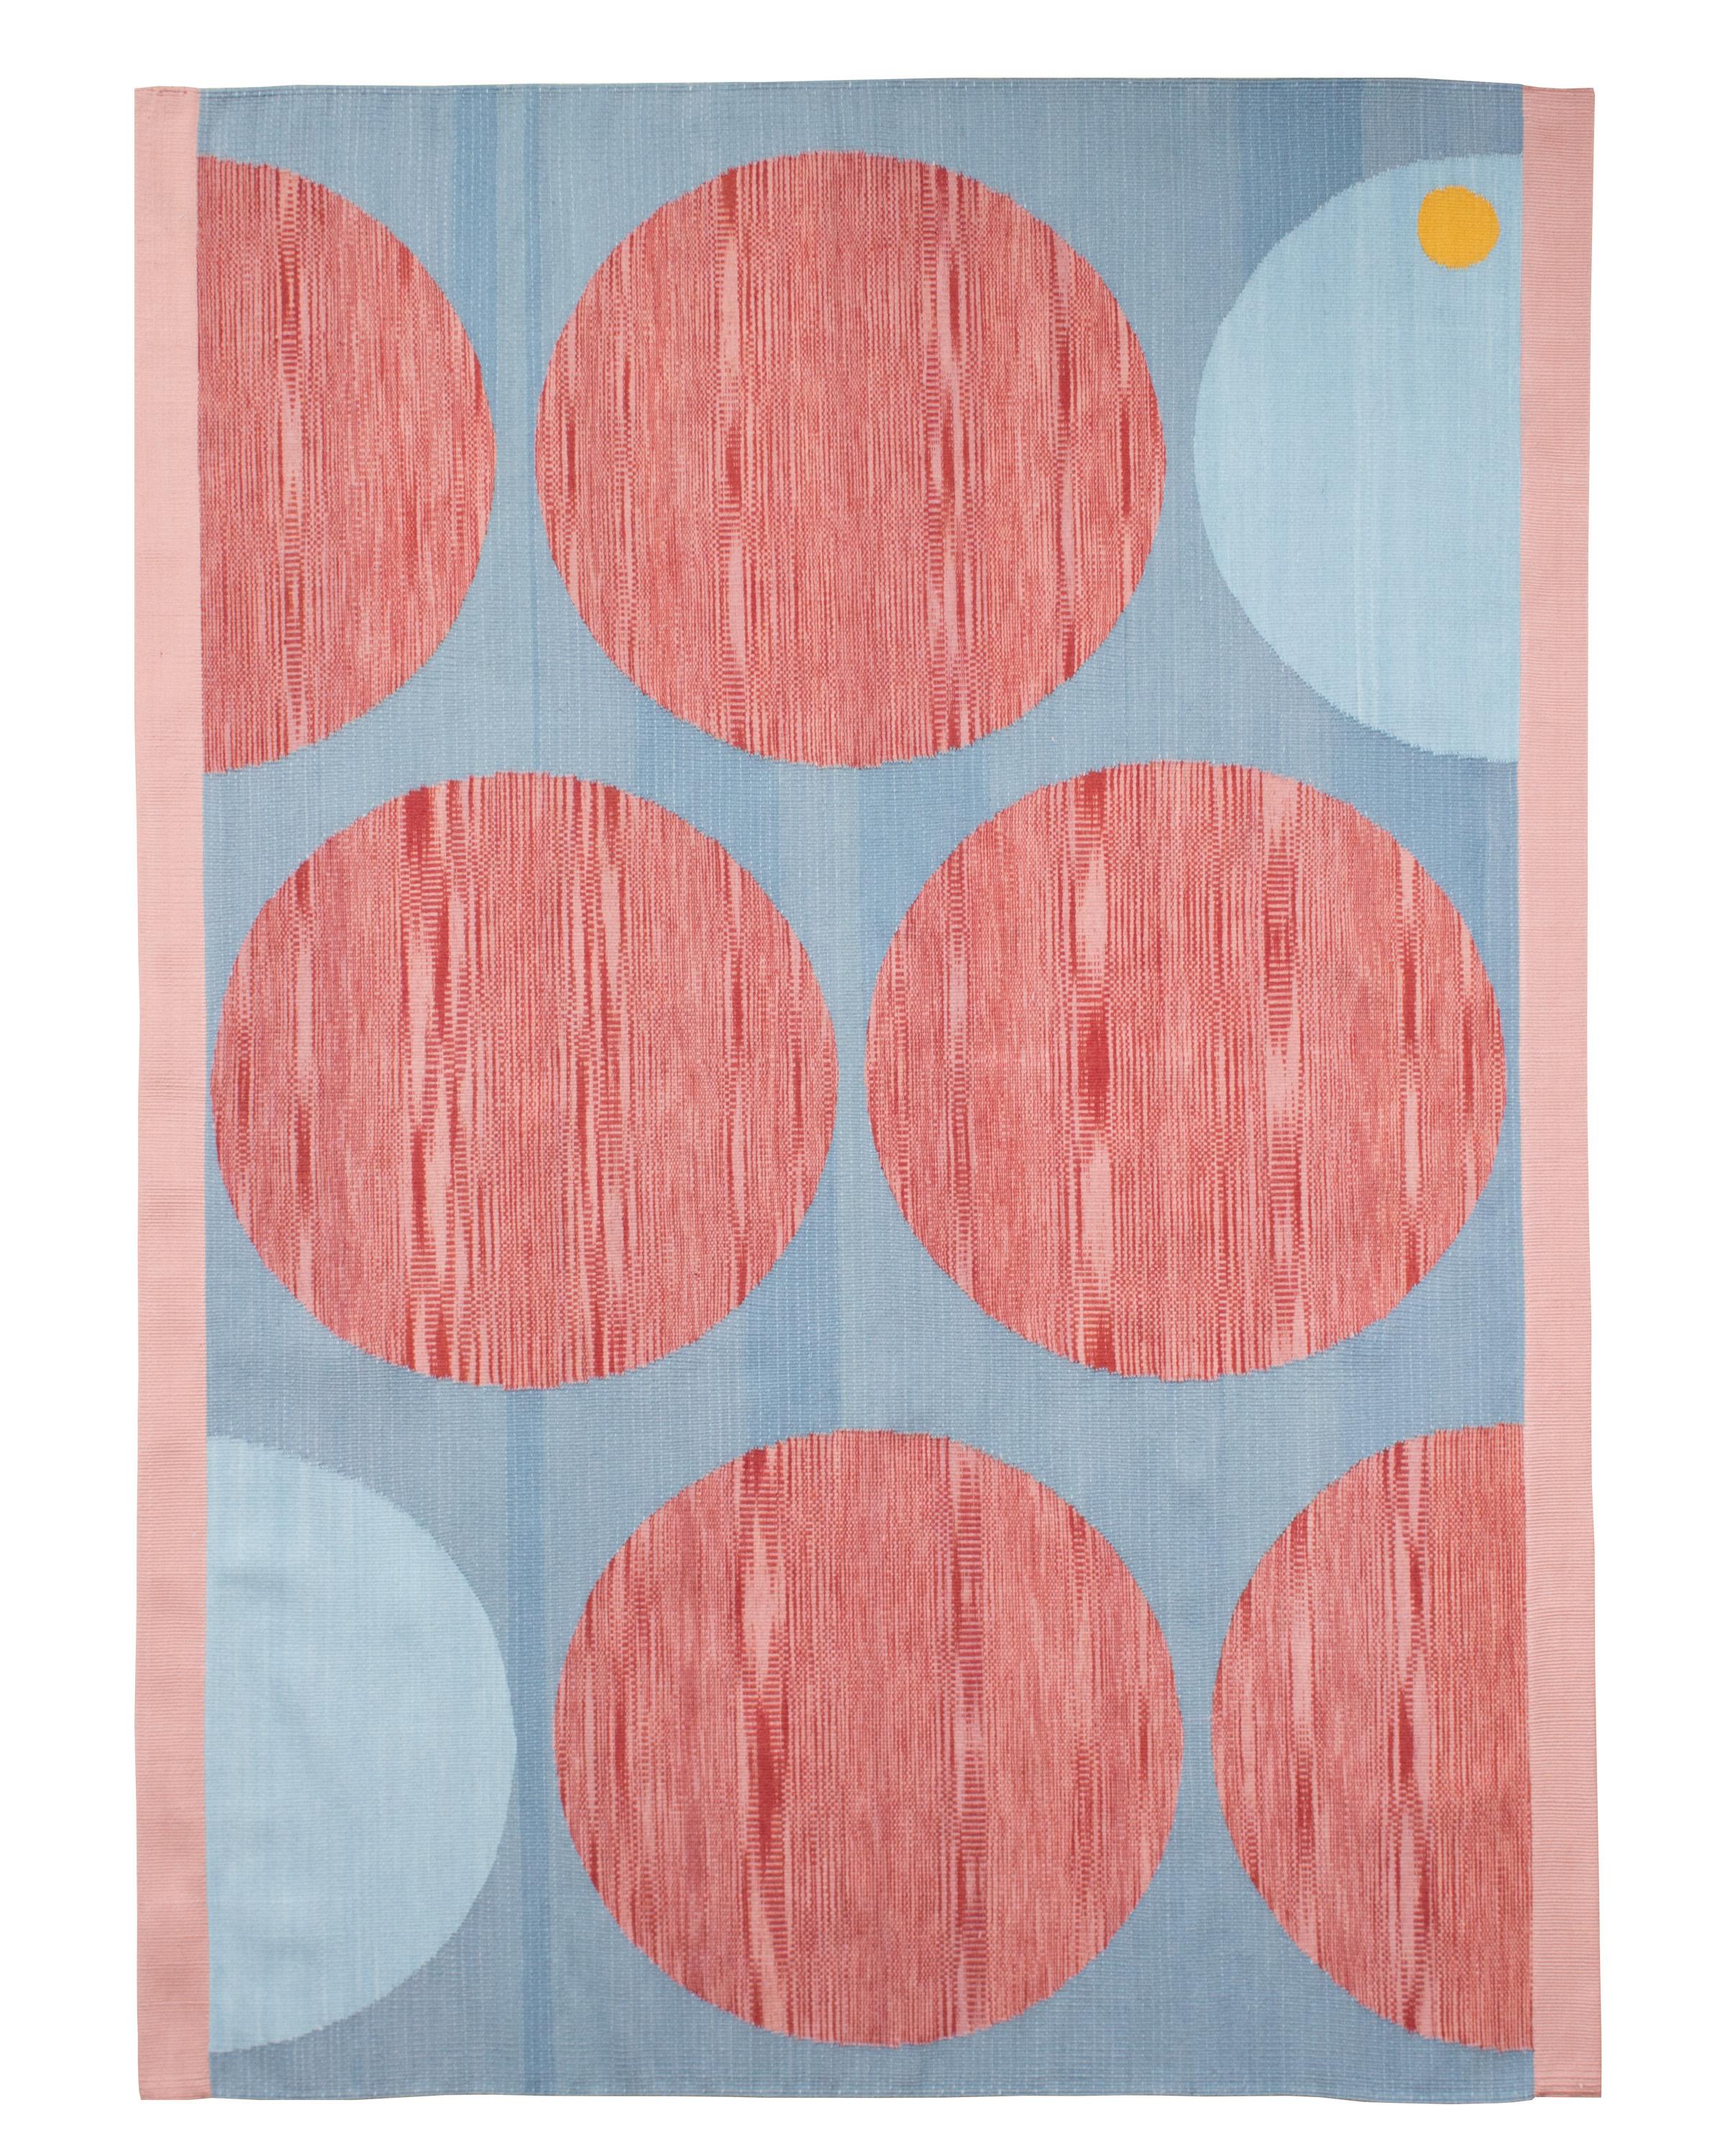 Norte 61 N02 rug by Bi Yuu
Dimensions: D200 x 300 H cm
Material: 70% Lincoln Wool / 30% Wool-Cotton
Density: 2800 yam passes per m2.
Also Available in different dimensions. Dye: Natural.

She founded Bi Yuu with the vision that the work would